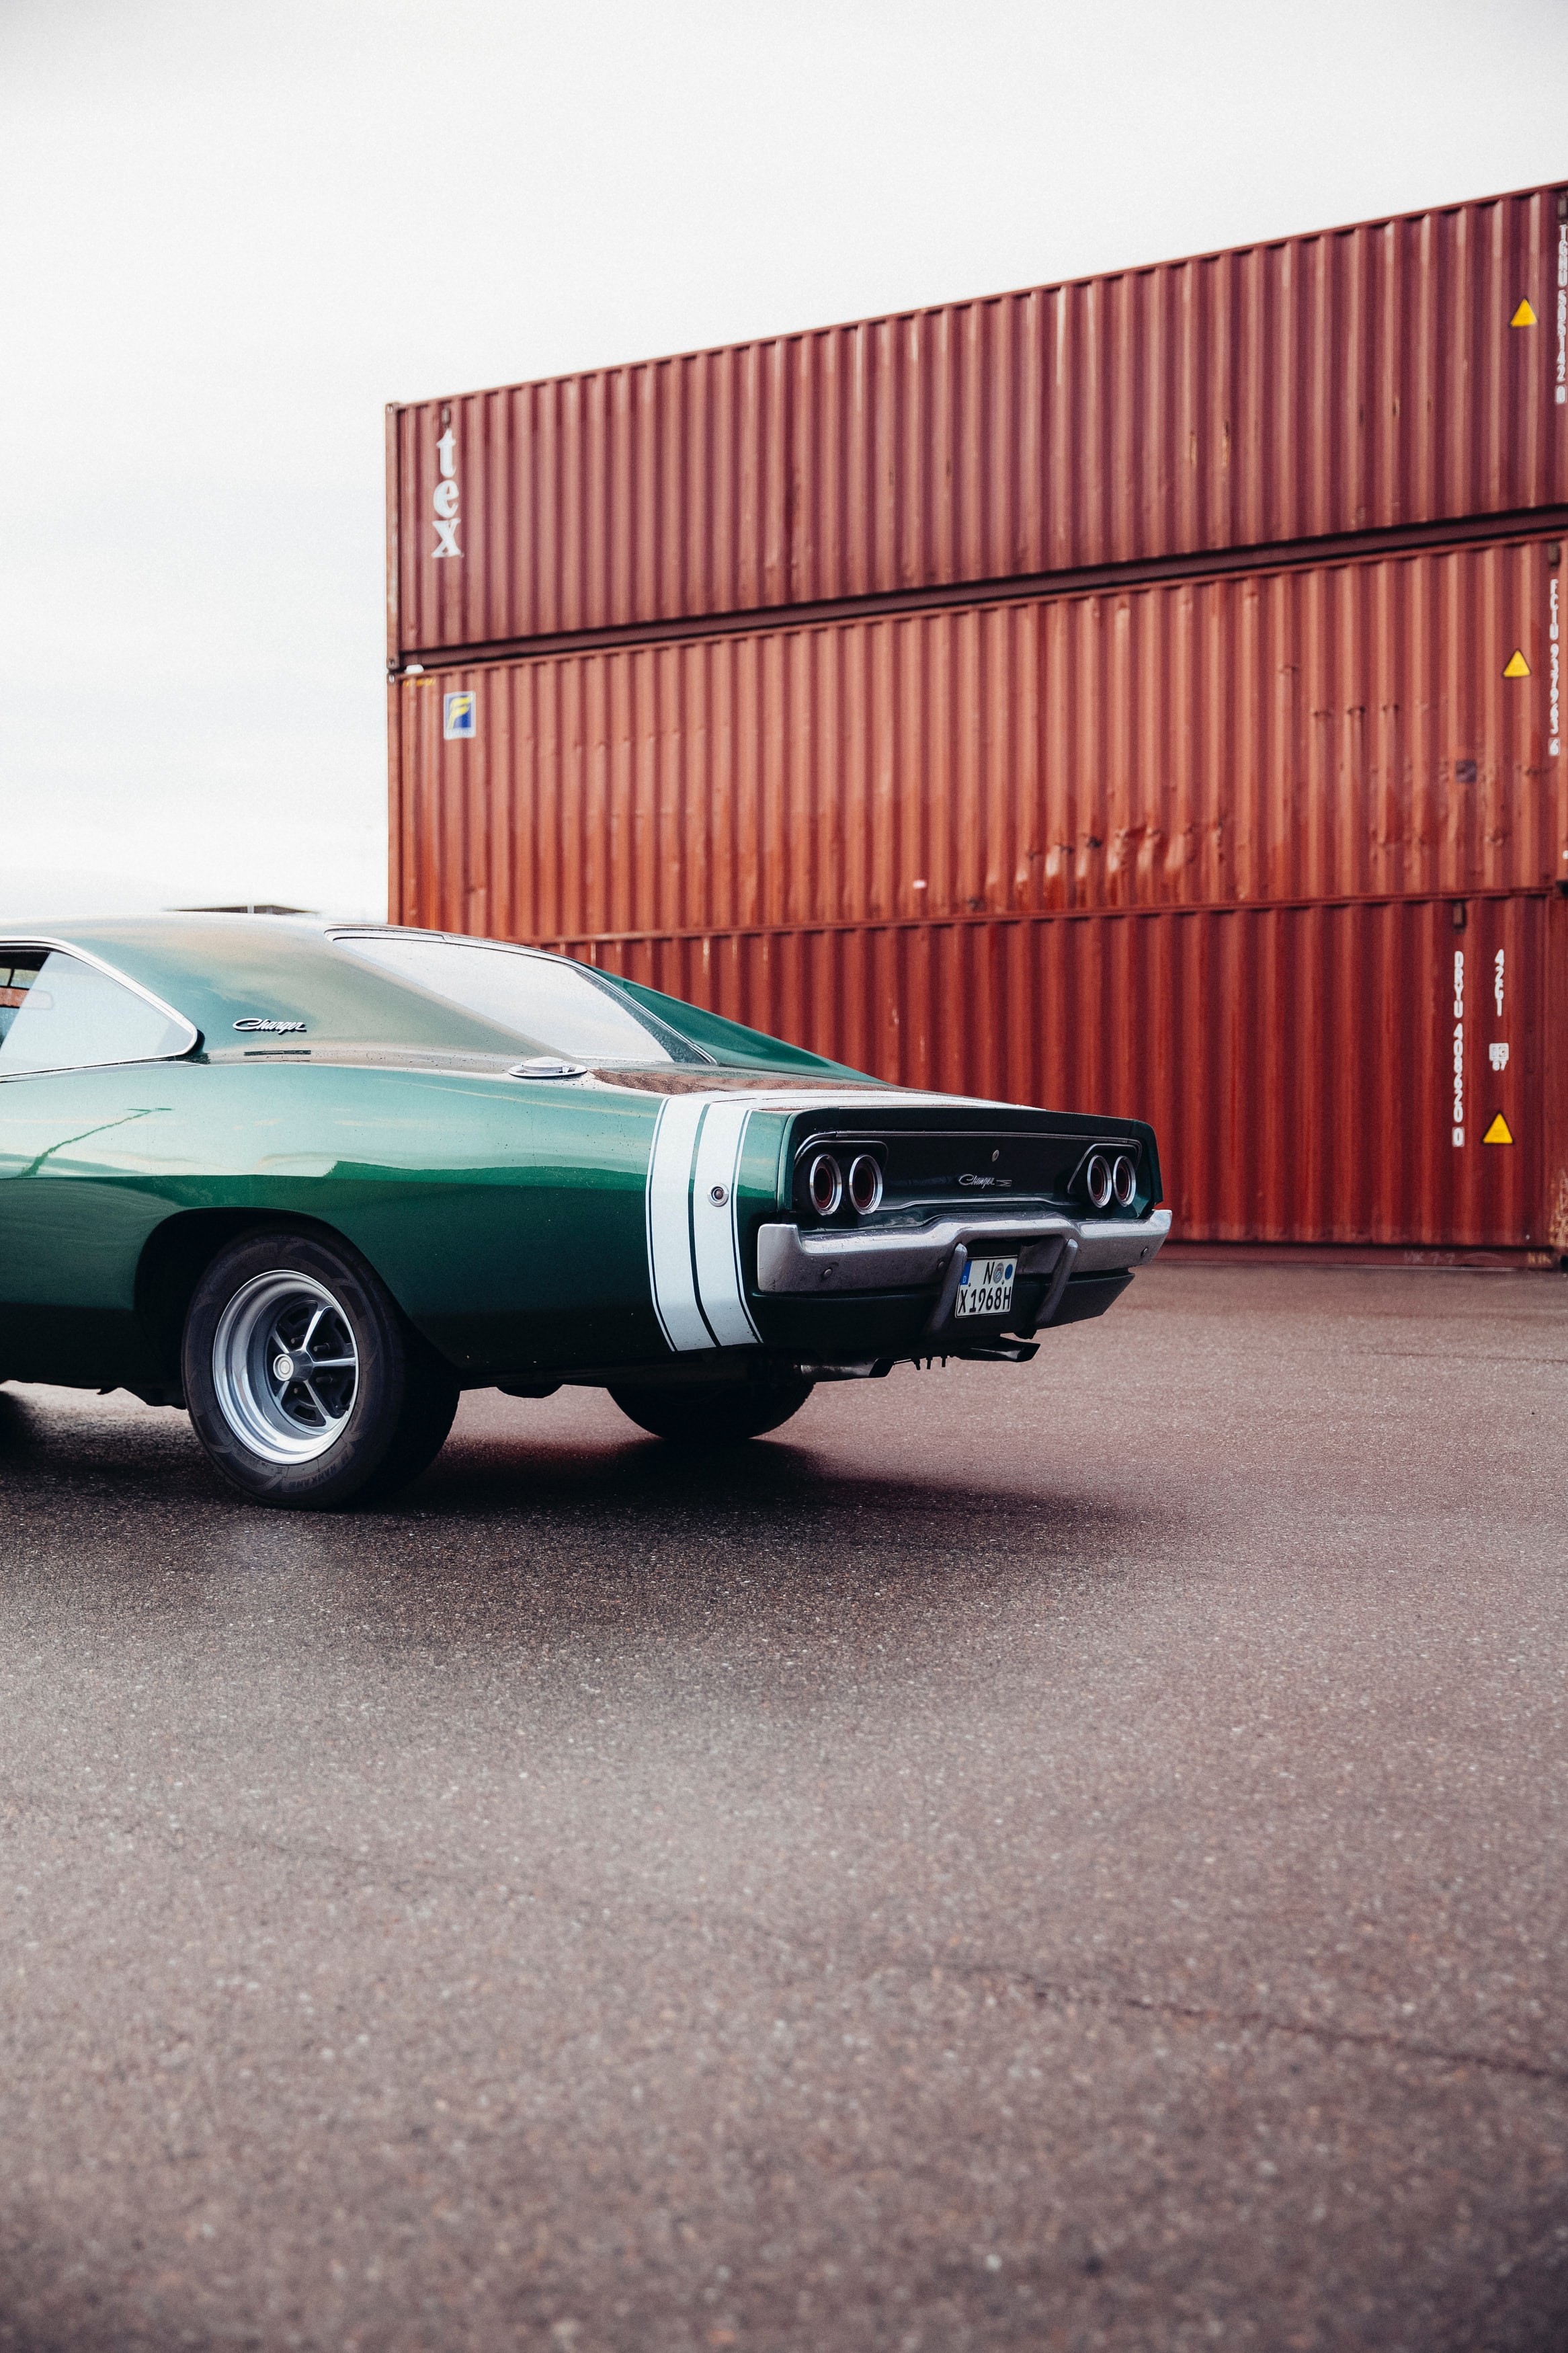 dodge charger, dodge, cars, green, car, retro